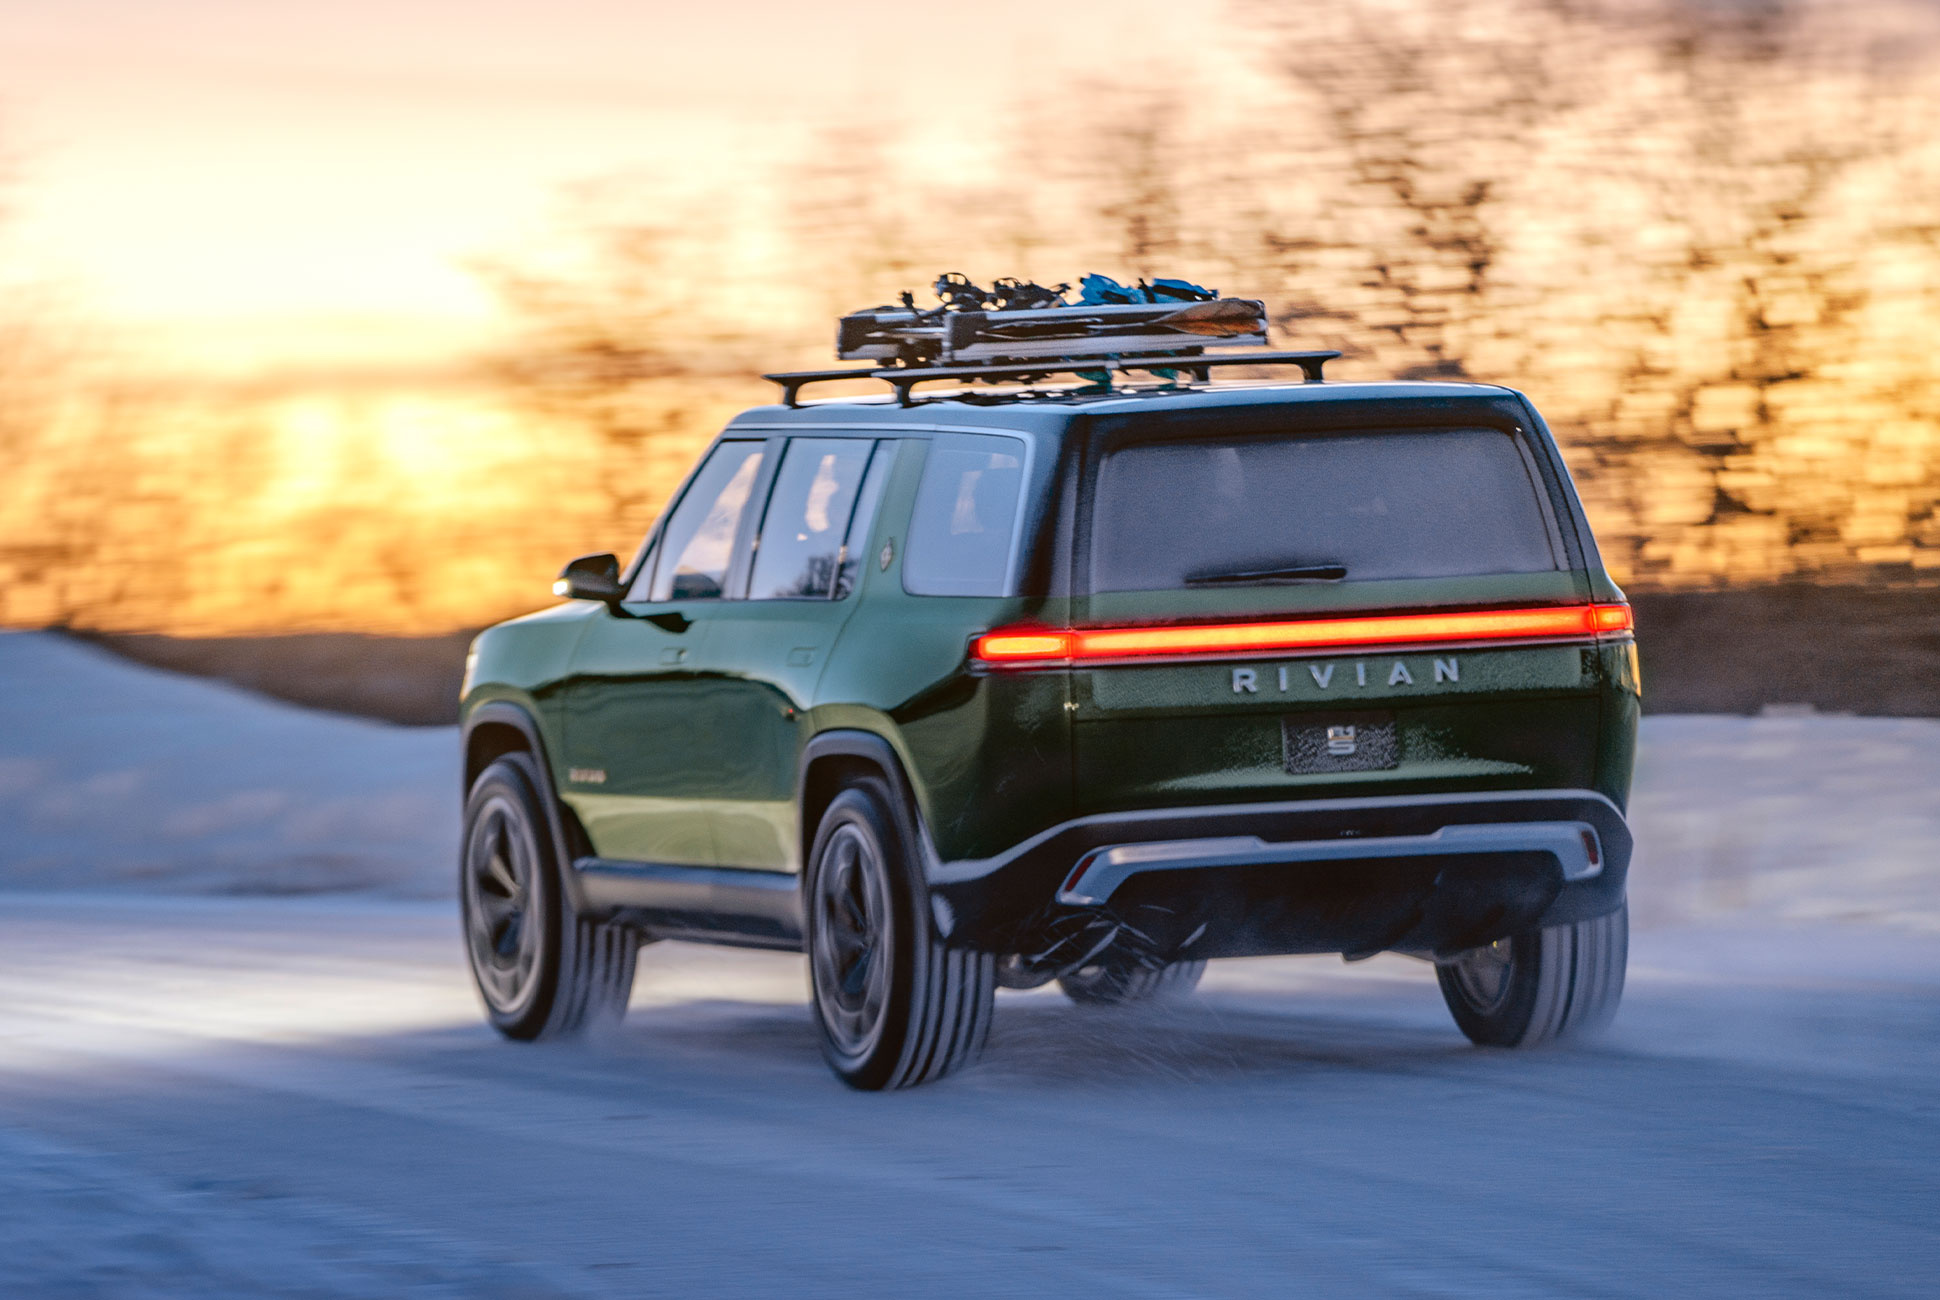 This Cool New Electric SUV Will Offer a Feature OffRoaders Should Love